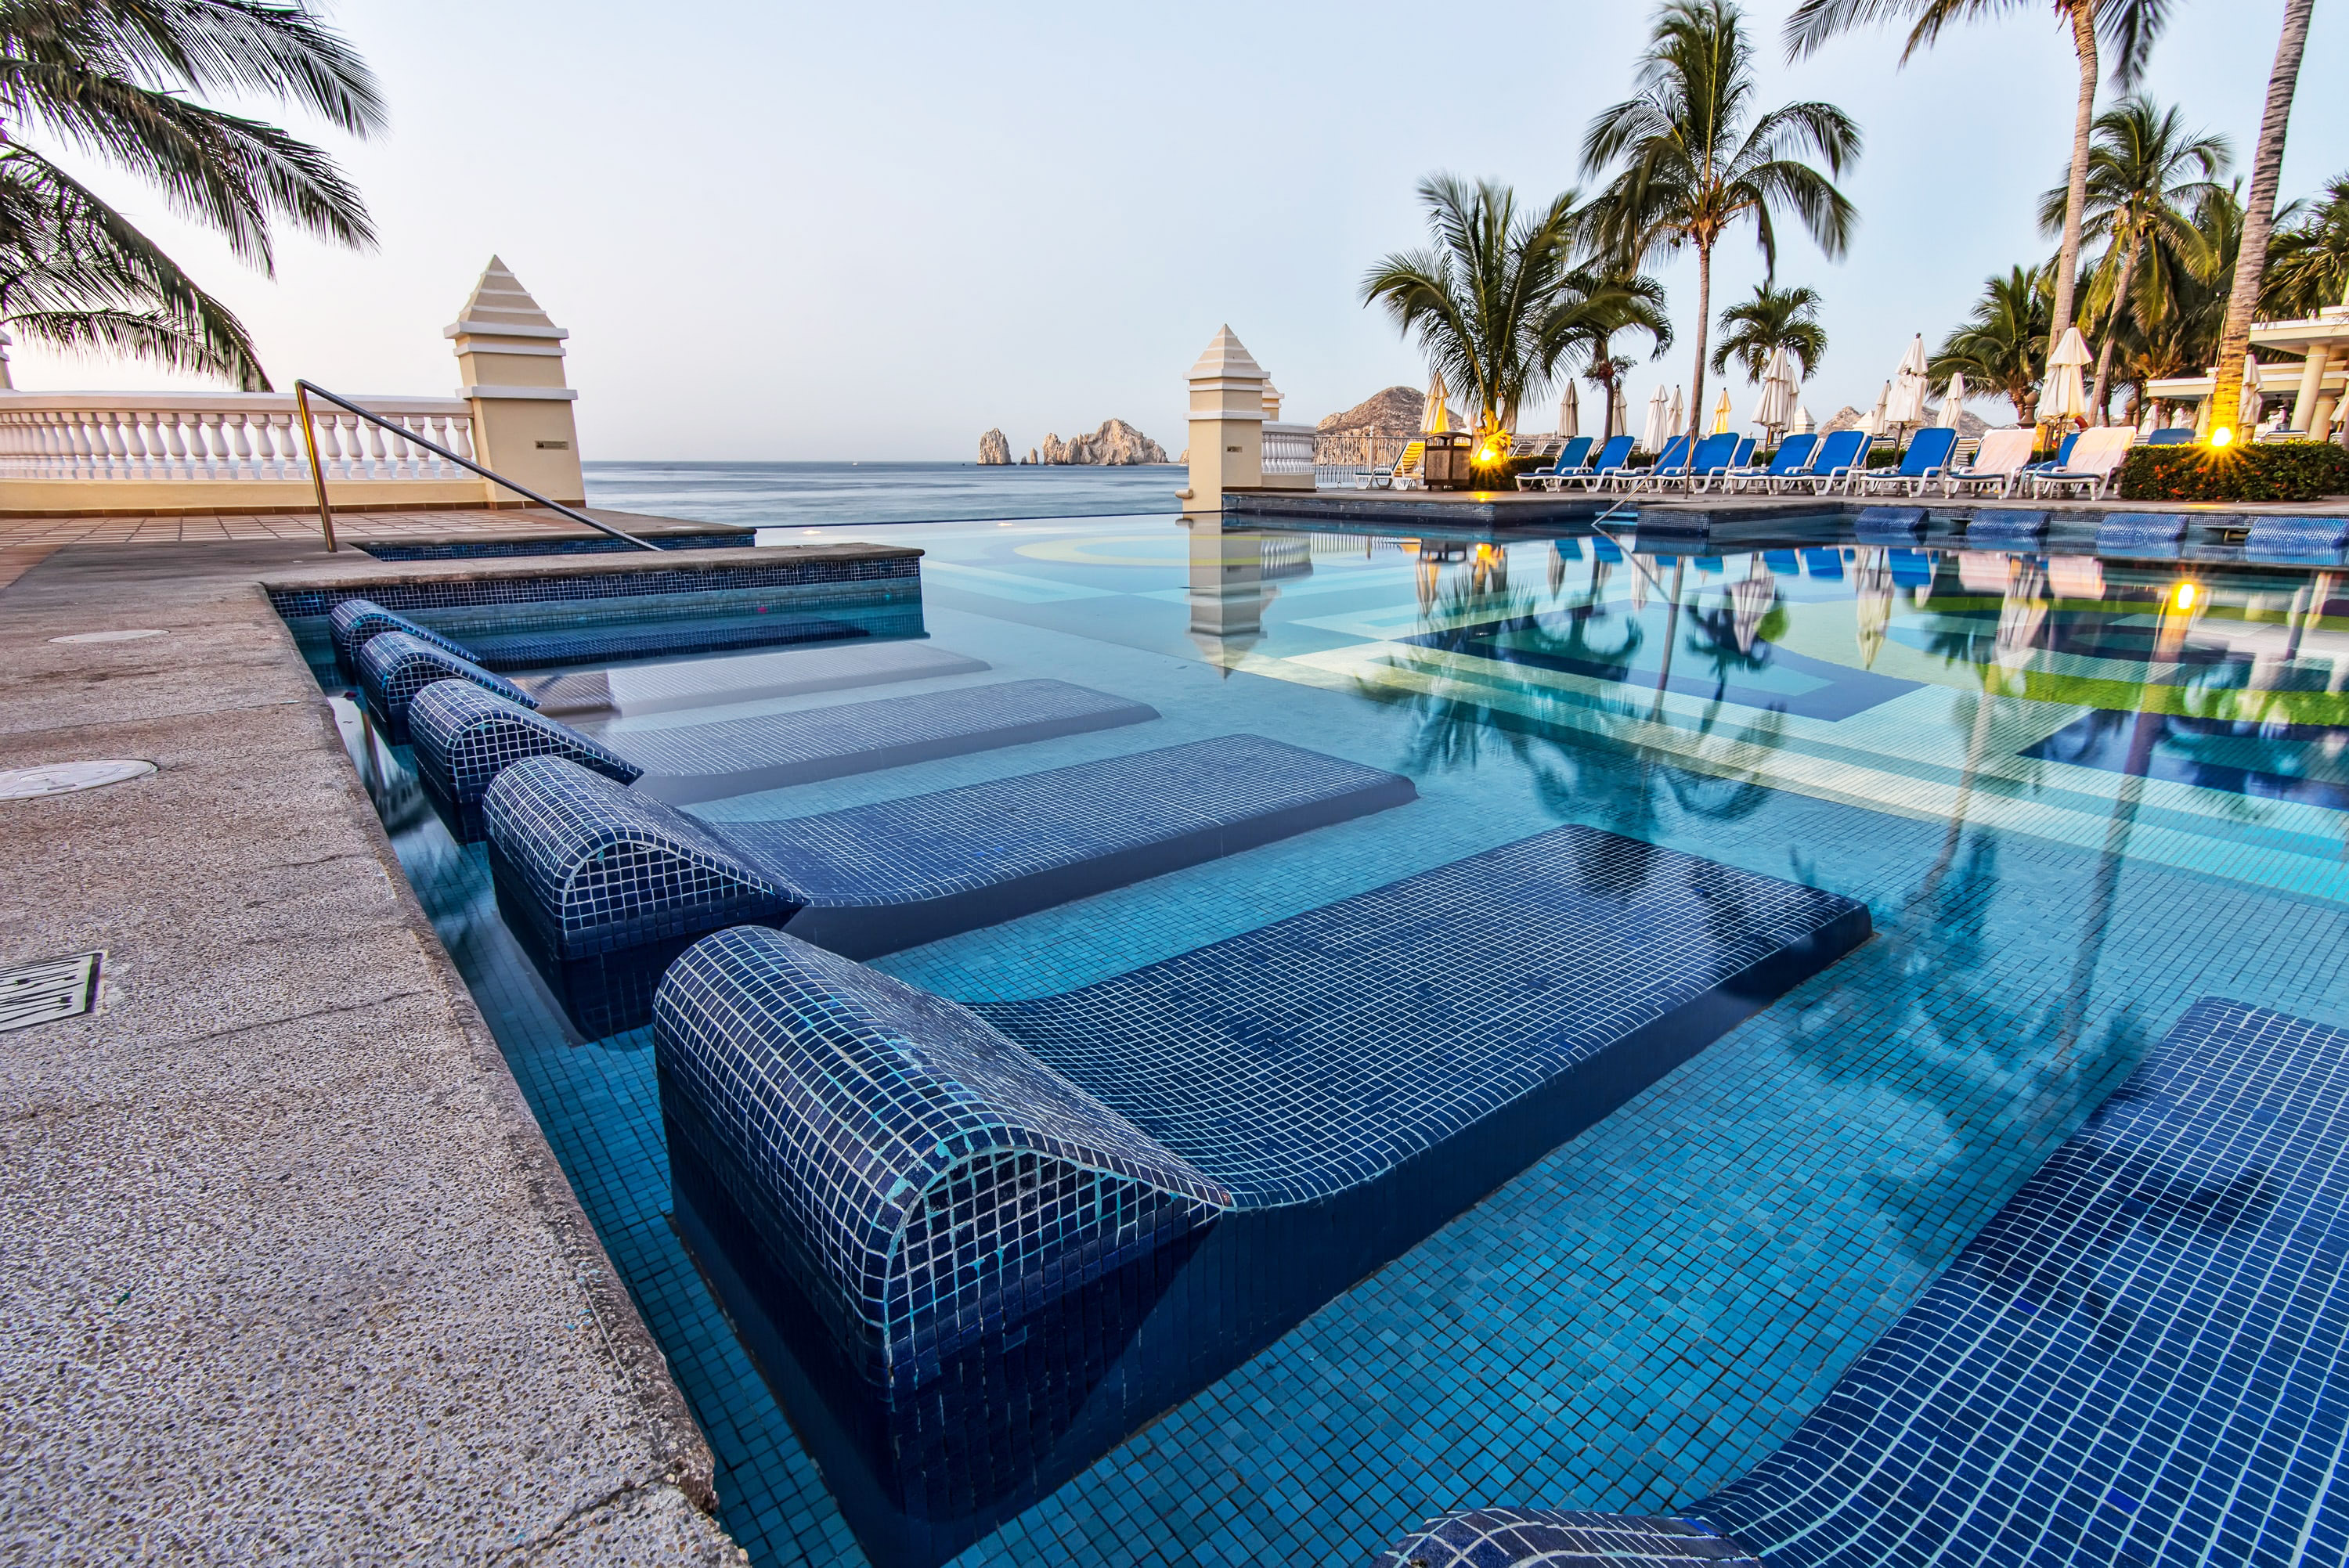 swimming pool at a resort hotel in cabo san lucas, mexico